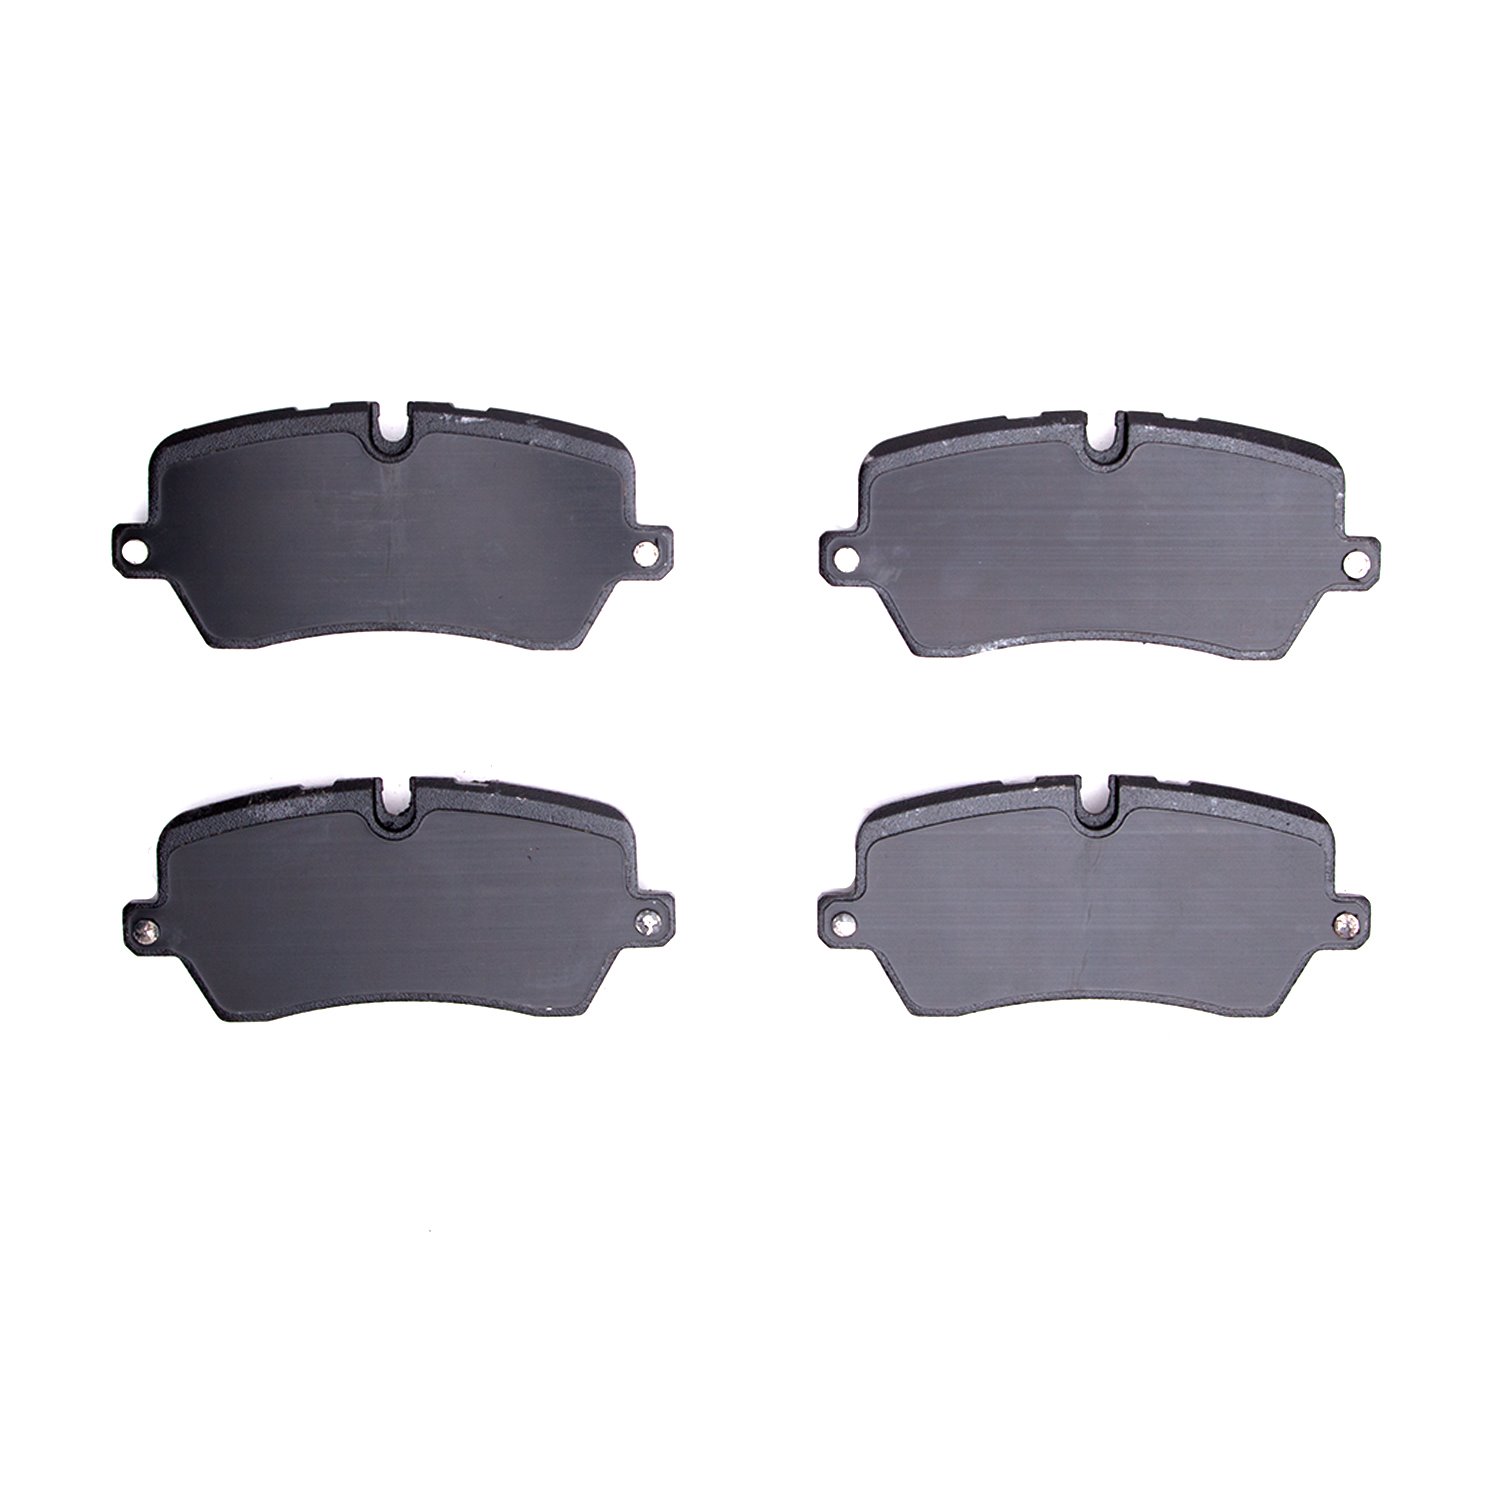 1551-1692-00 5000 Advanced Low-Metallic Brake Pads, Fits Select Land Rover, Position: Rear